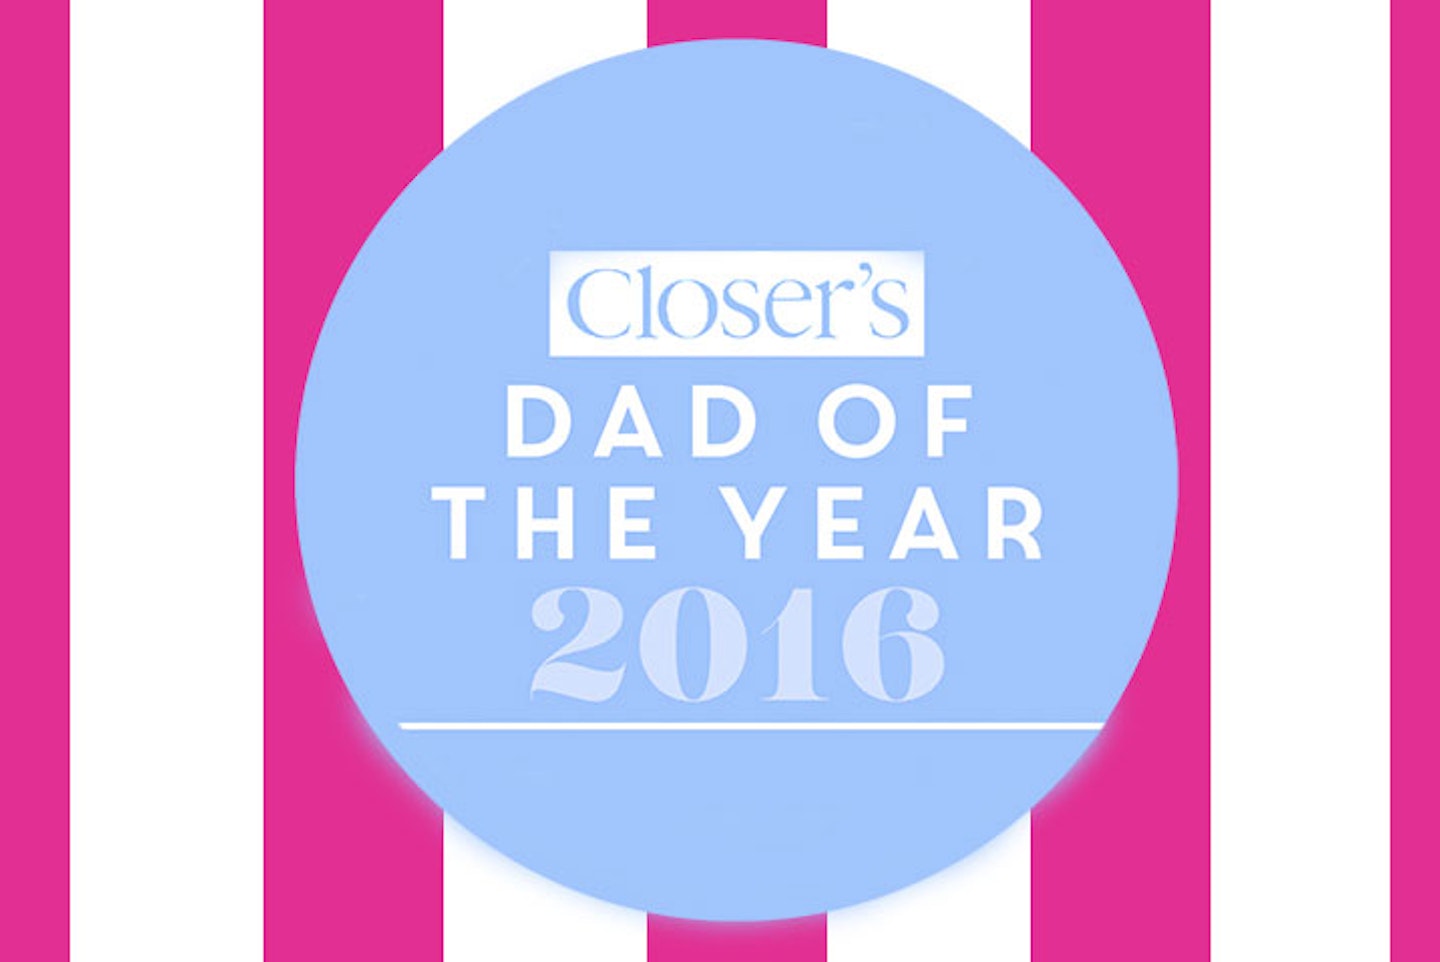 Closer's dad of the year awards